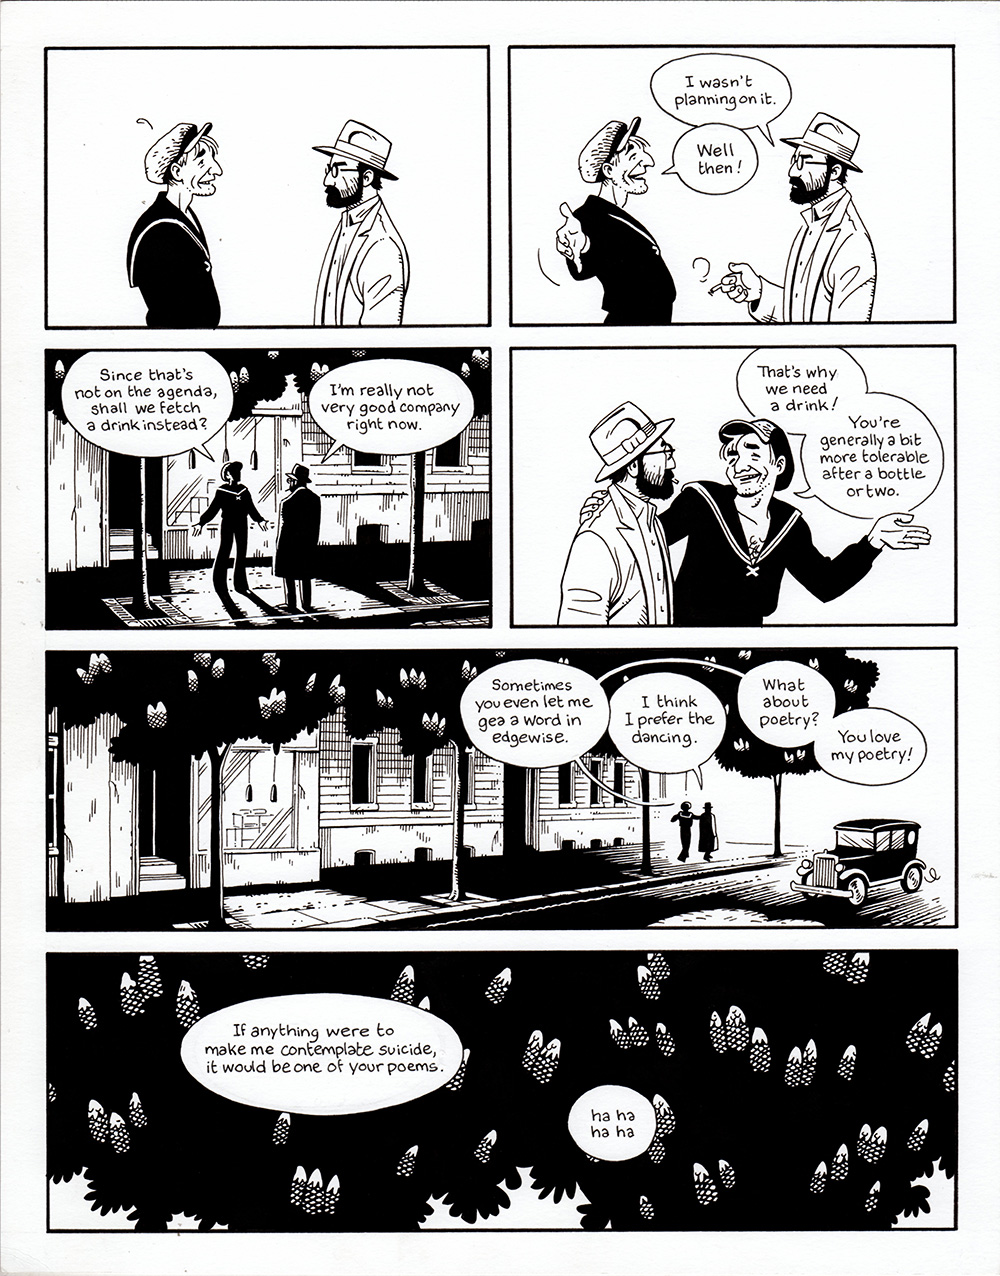 Berlin - page 442 Book Three: City of Light - page 040